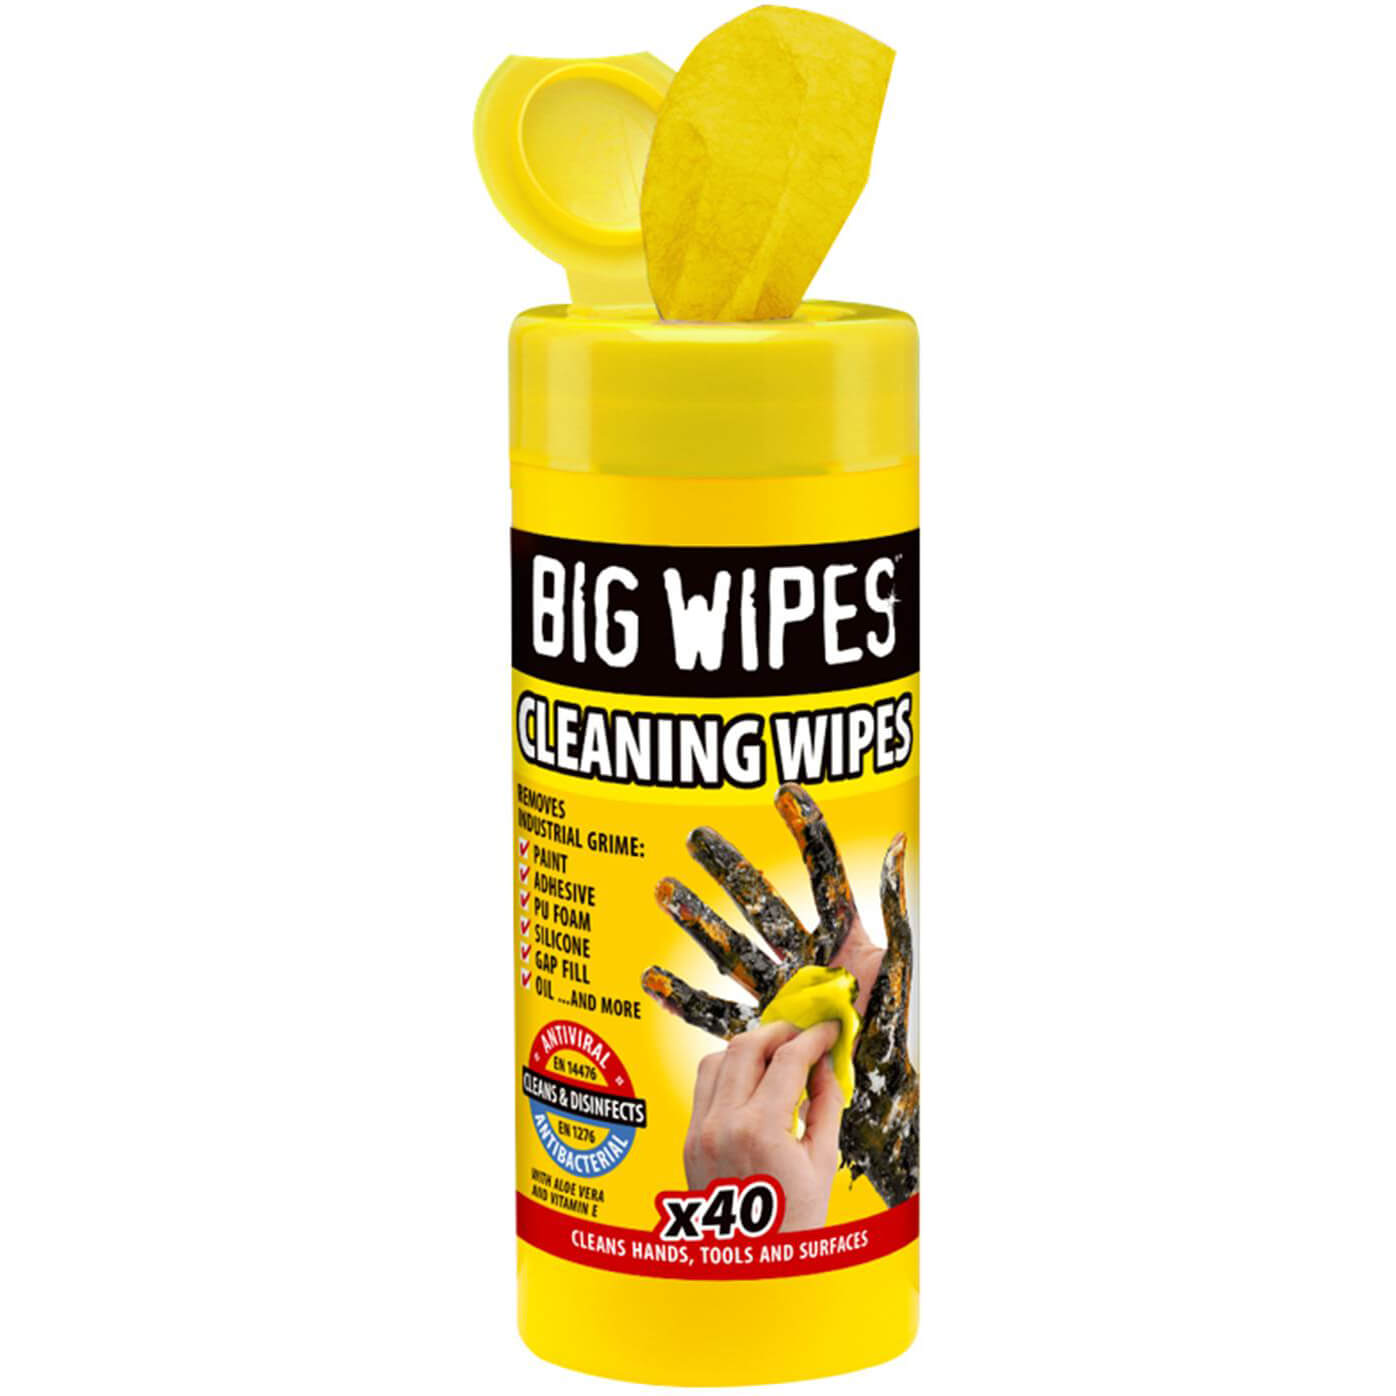 Image of Big Wipes Industrial Anti-Bacterial Cleaning Wipes Pack of 40